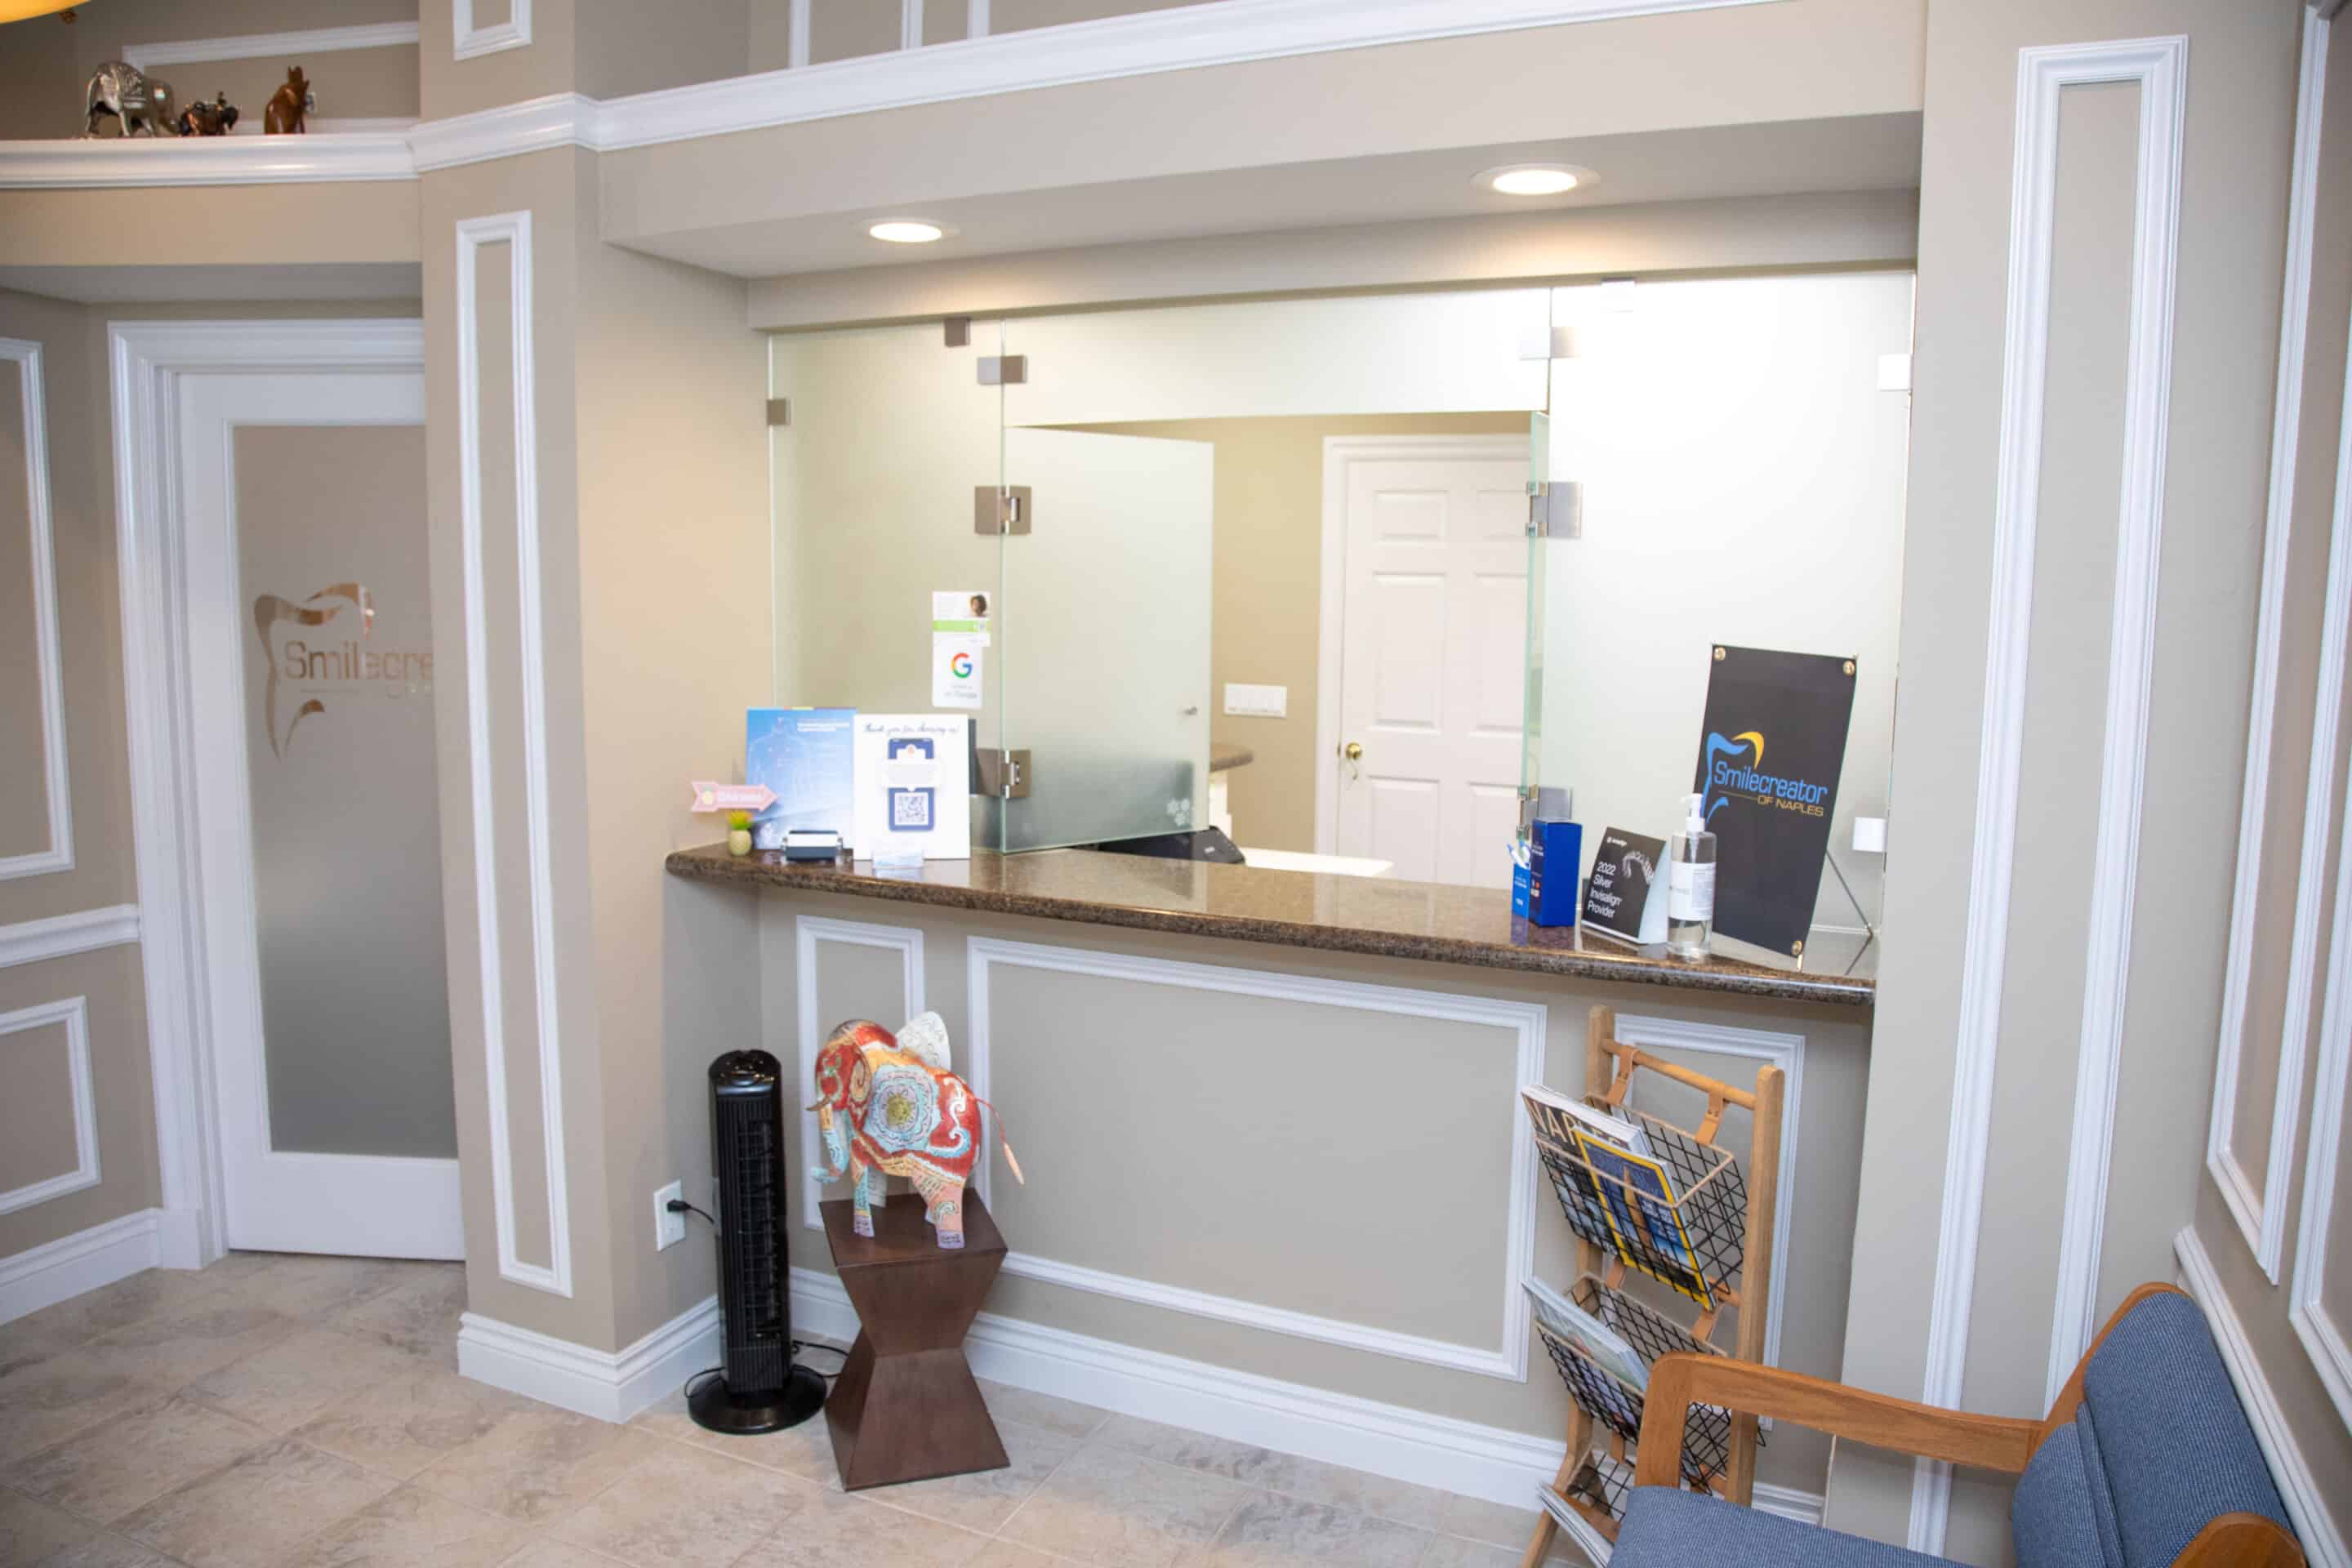 The front desk of the Naples location, within the brightly lit and inviting waiting room